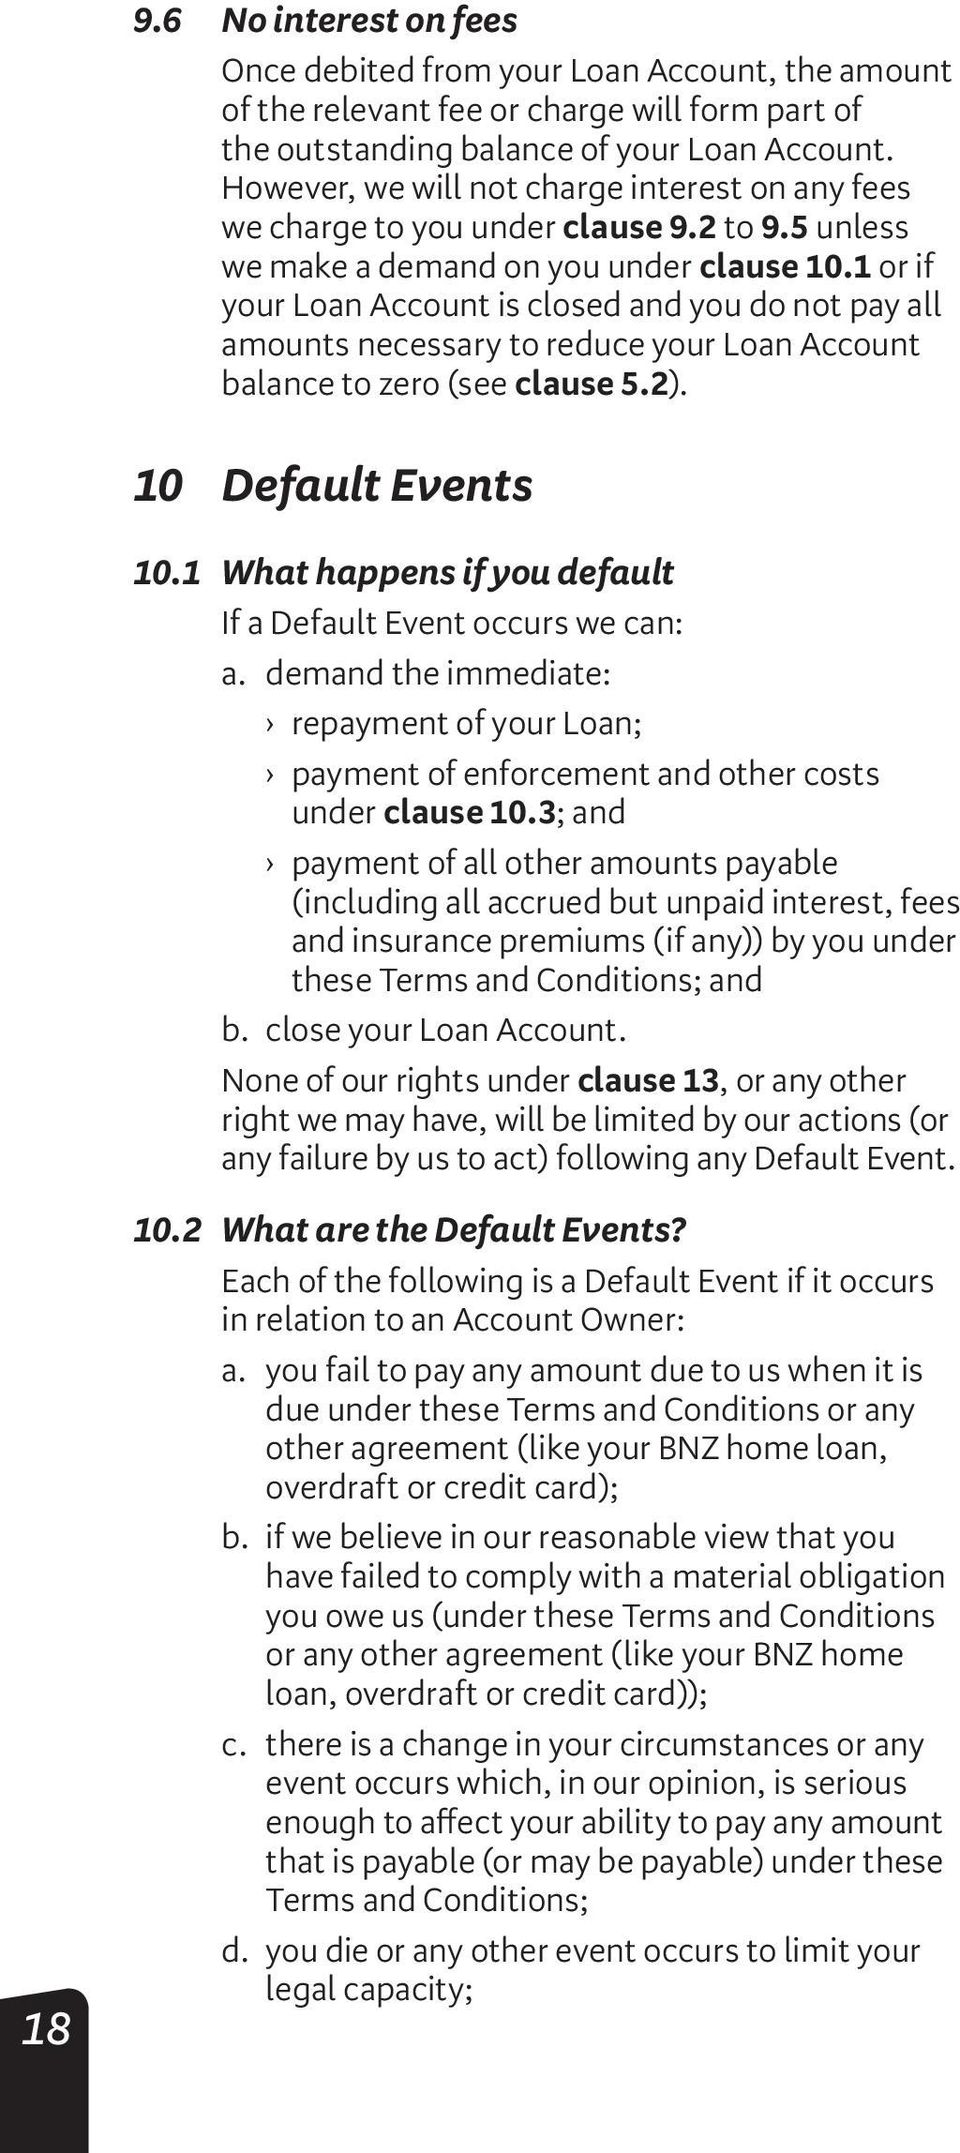 1 or if your Loan Account is closed and you do not pay all amounts necessary to reduce your Loan Account balance to zero (see clause 5.2). 10 Default Events 10.